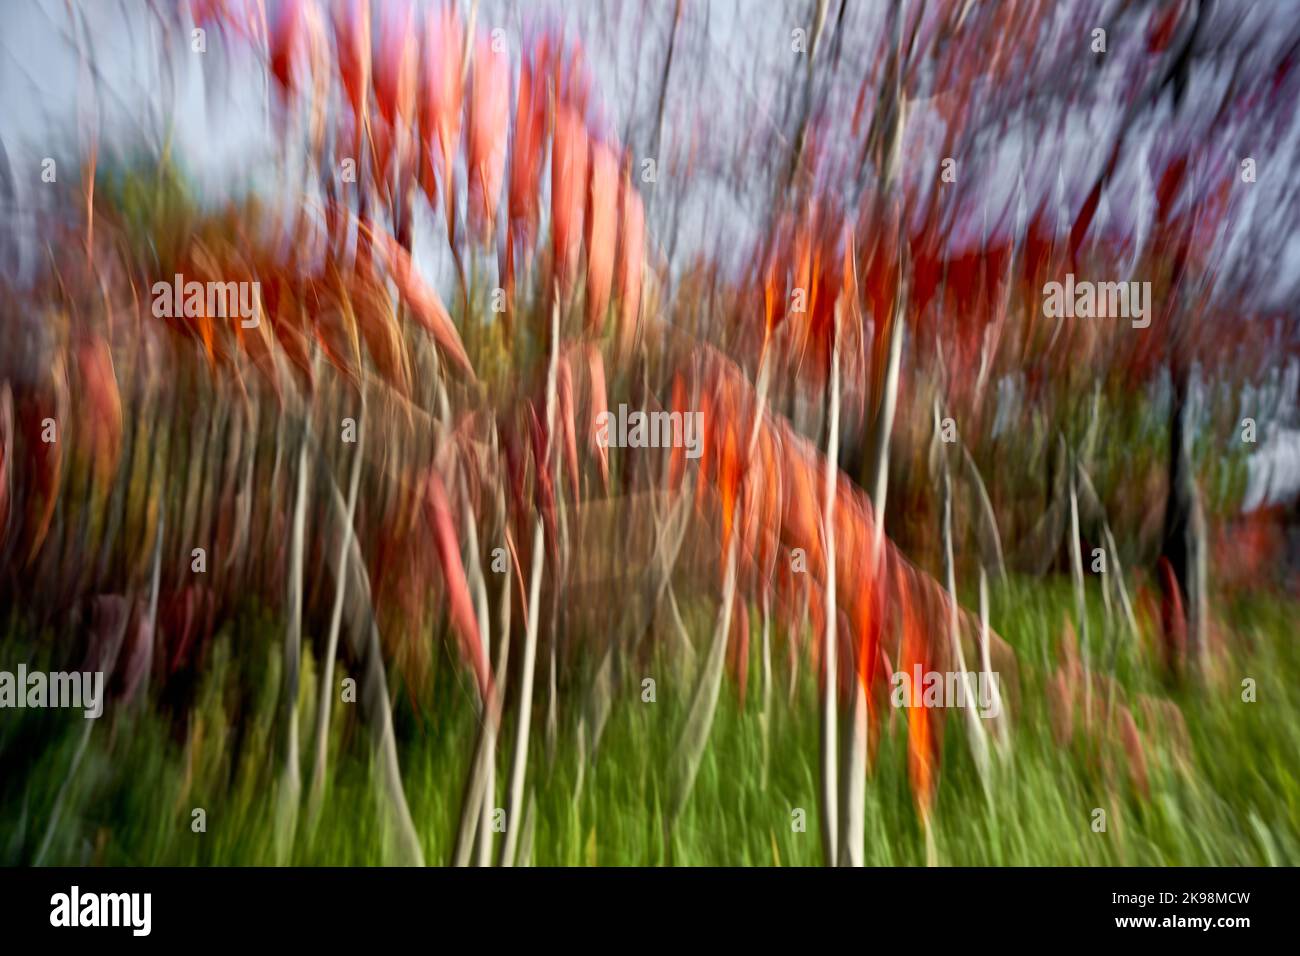 abstract images of movement in autumn gardens Stock Photo